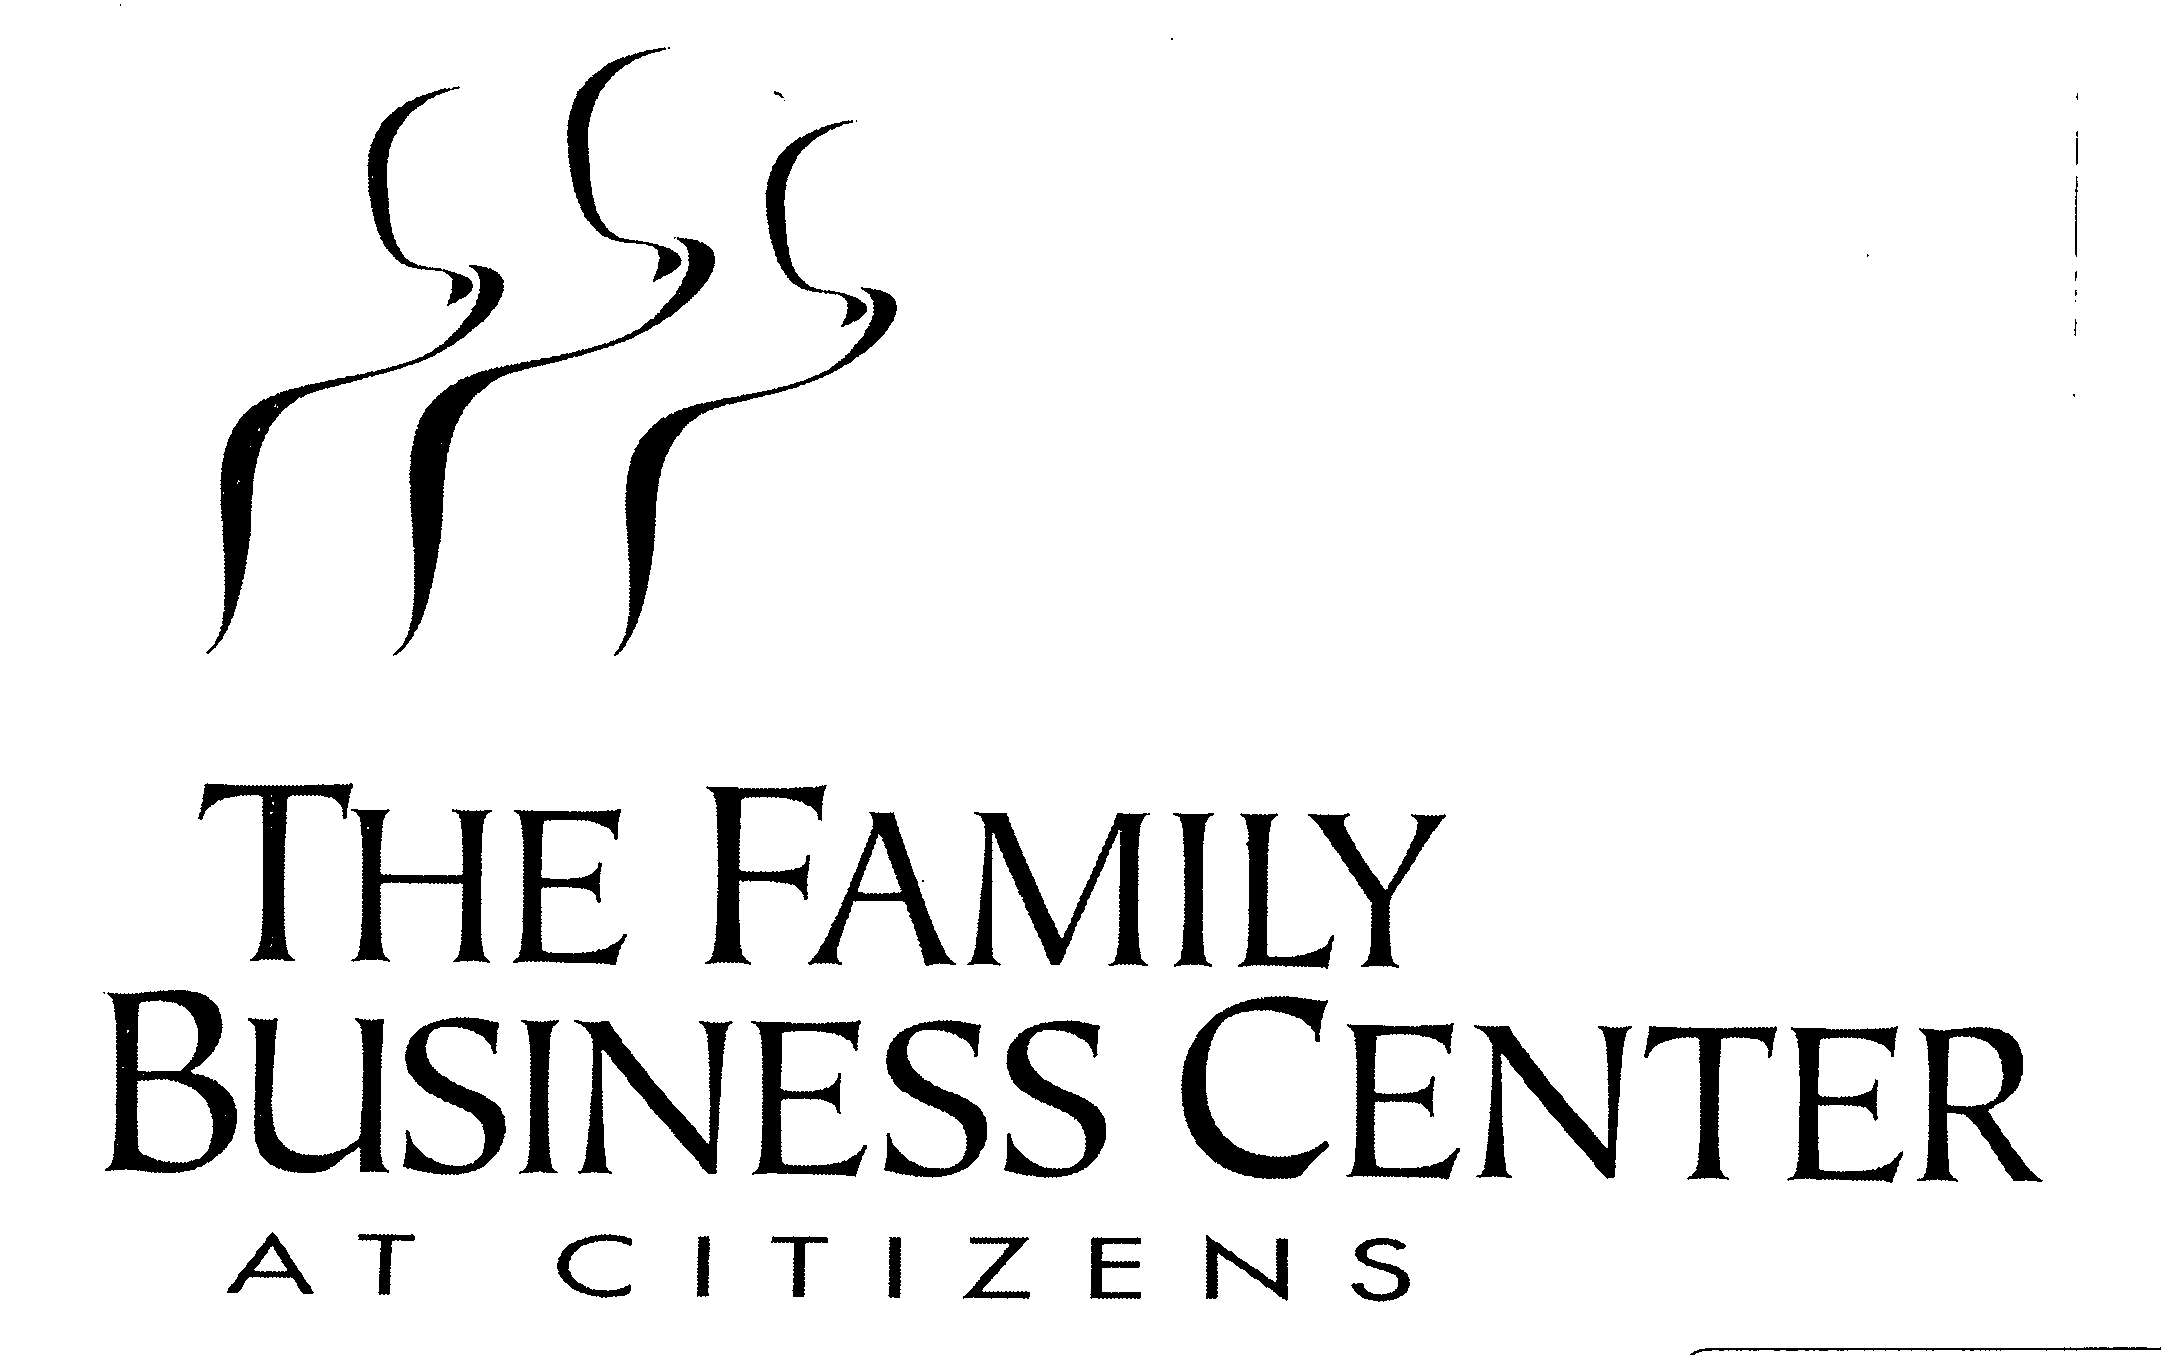  THE FAMILY BUSINESS CENTER AT CITIZENS